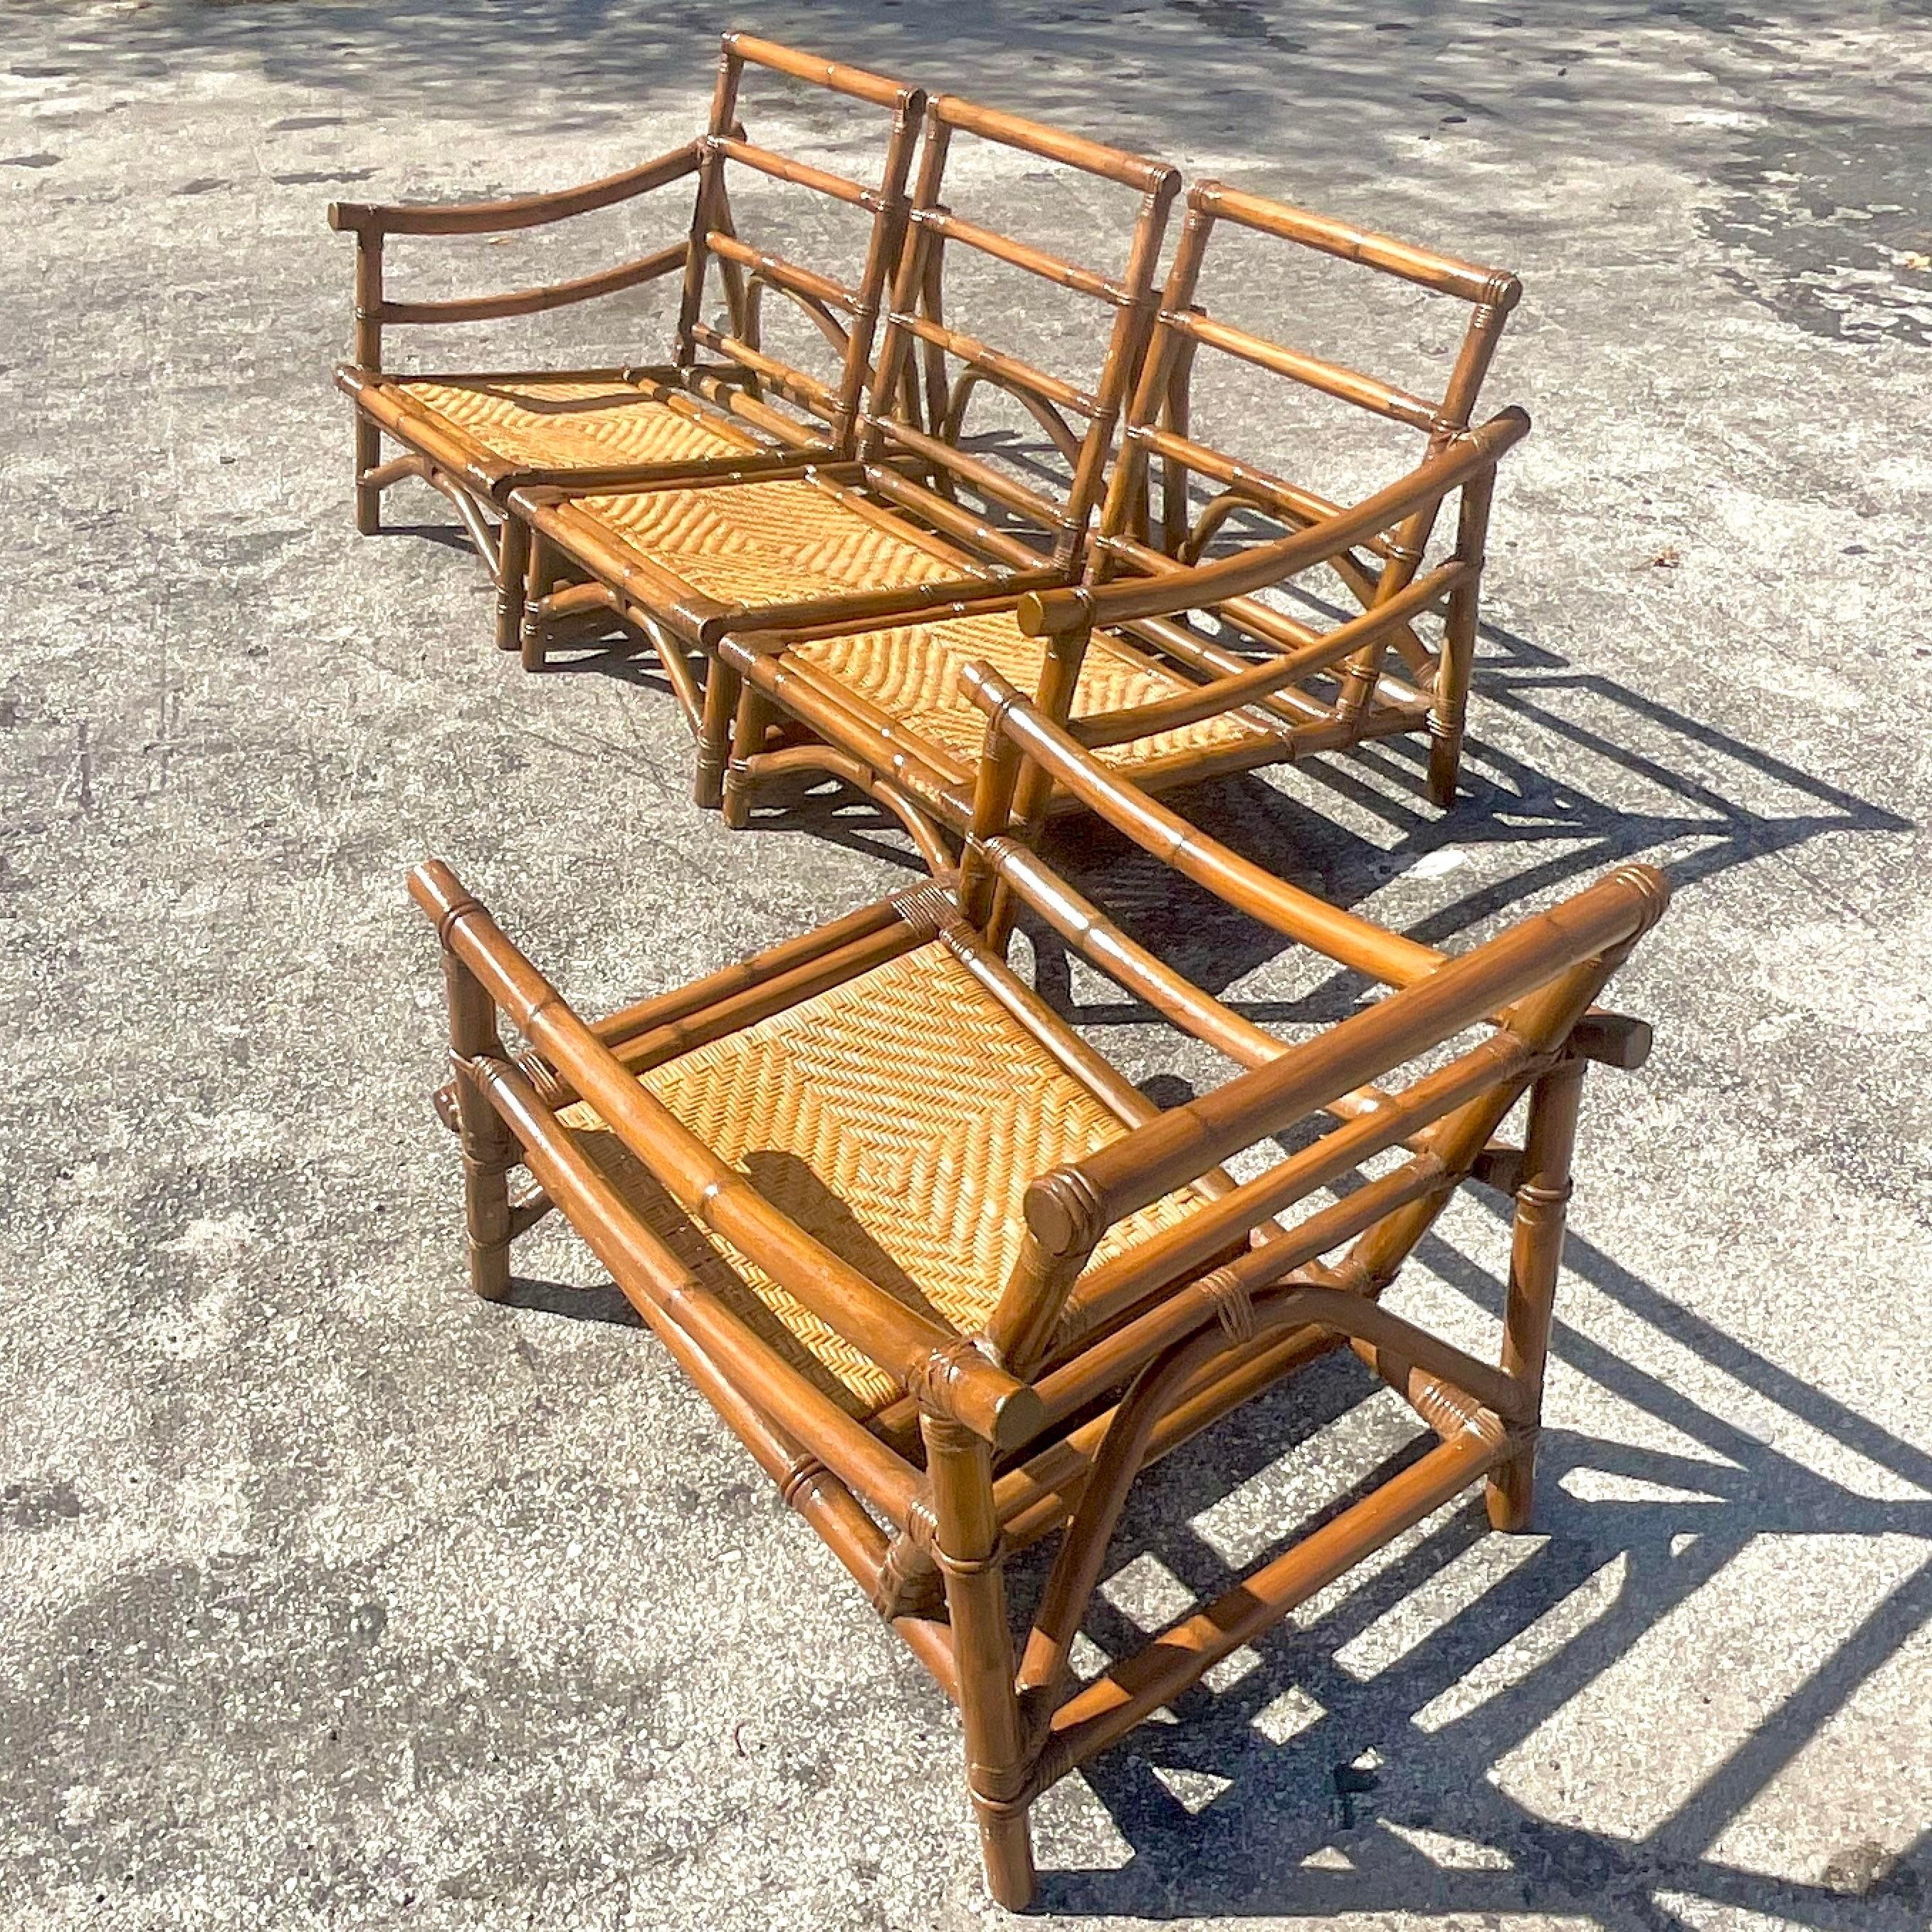 A fabulous vintage Coastal Bent rattan sofa set. Made by the iconic Calif-Asia group. Don’t in the manner of John Wisner with the coveted Pagoda arms. Inset woven rattan seat panels. Acquired from a Palm Beach estate.